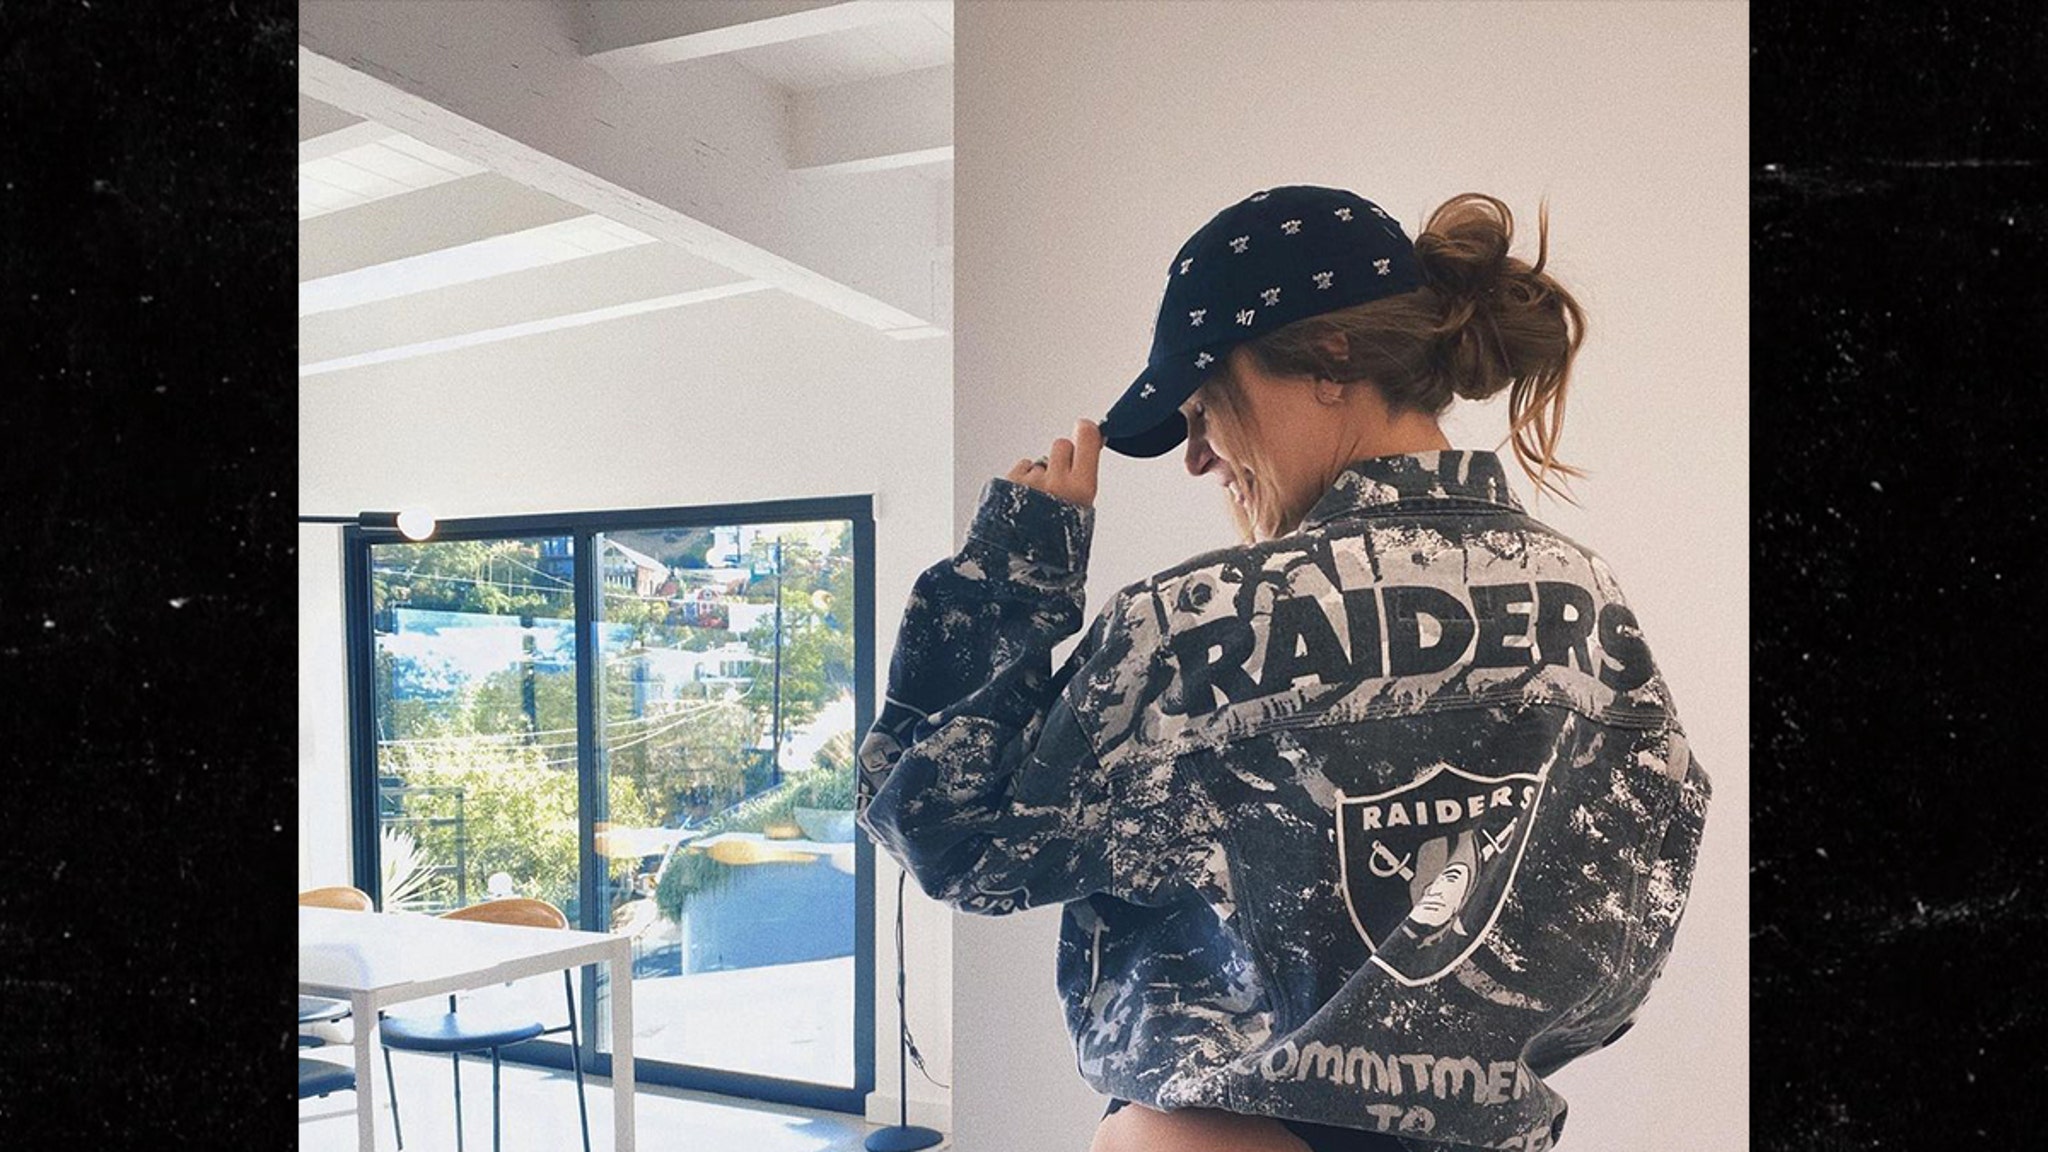 Model Josephine Skriver's Raiders Outfit, Commitment to Assellence